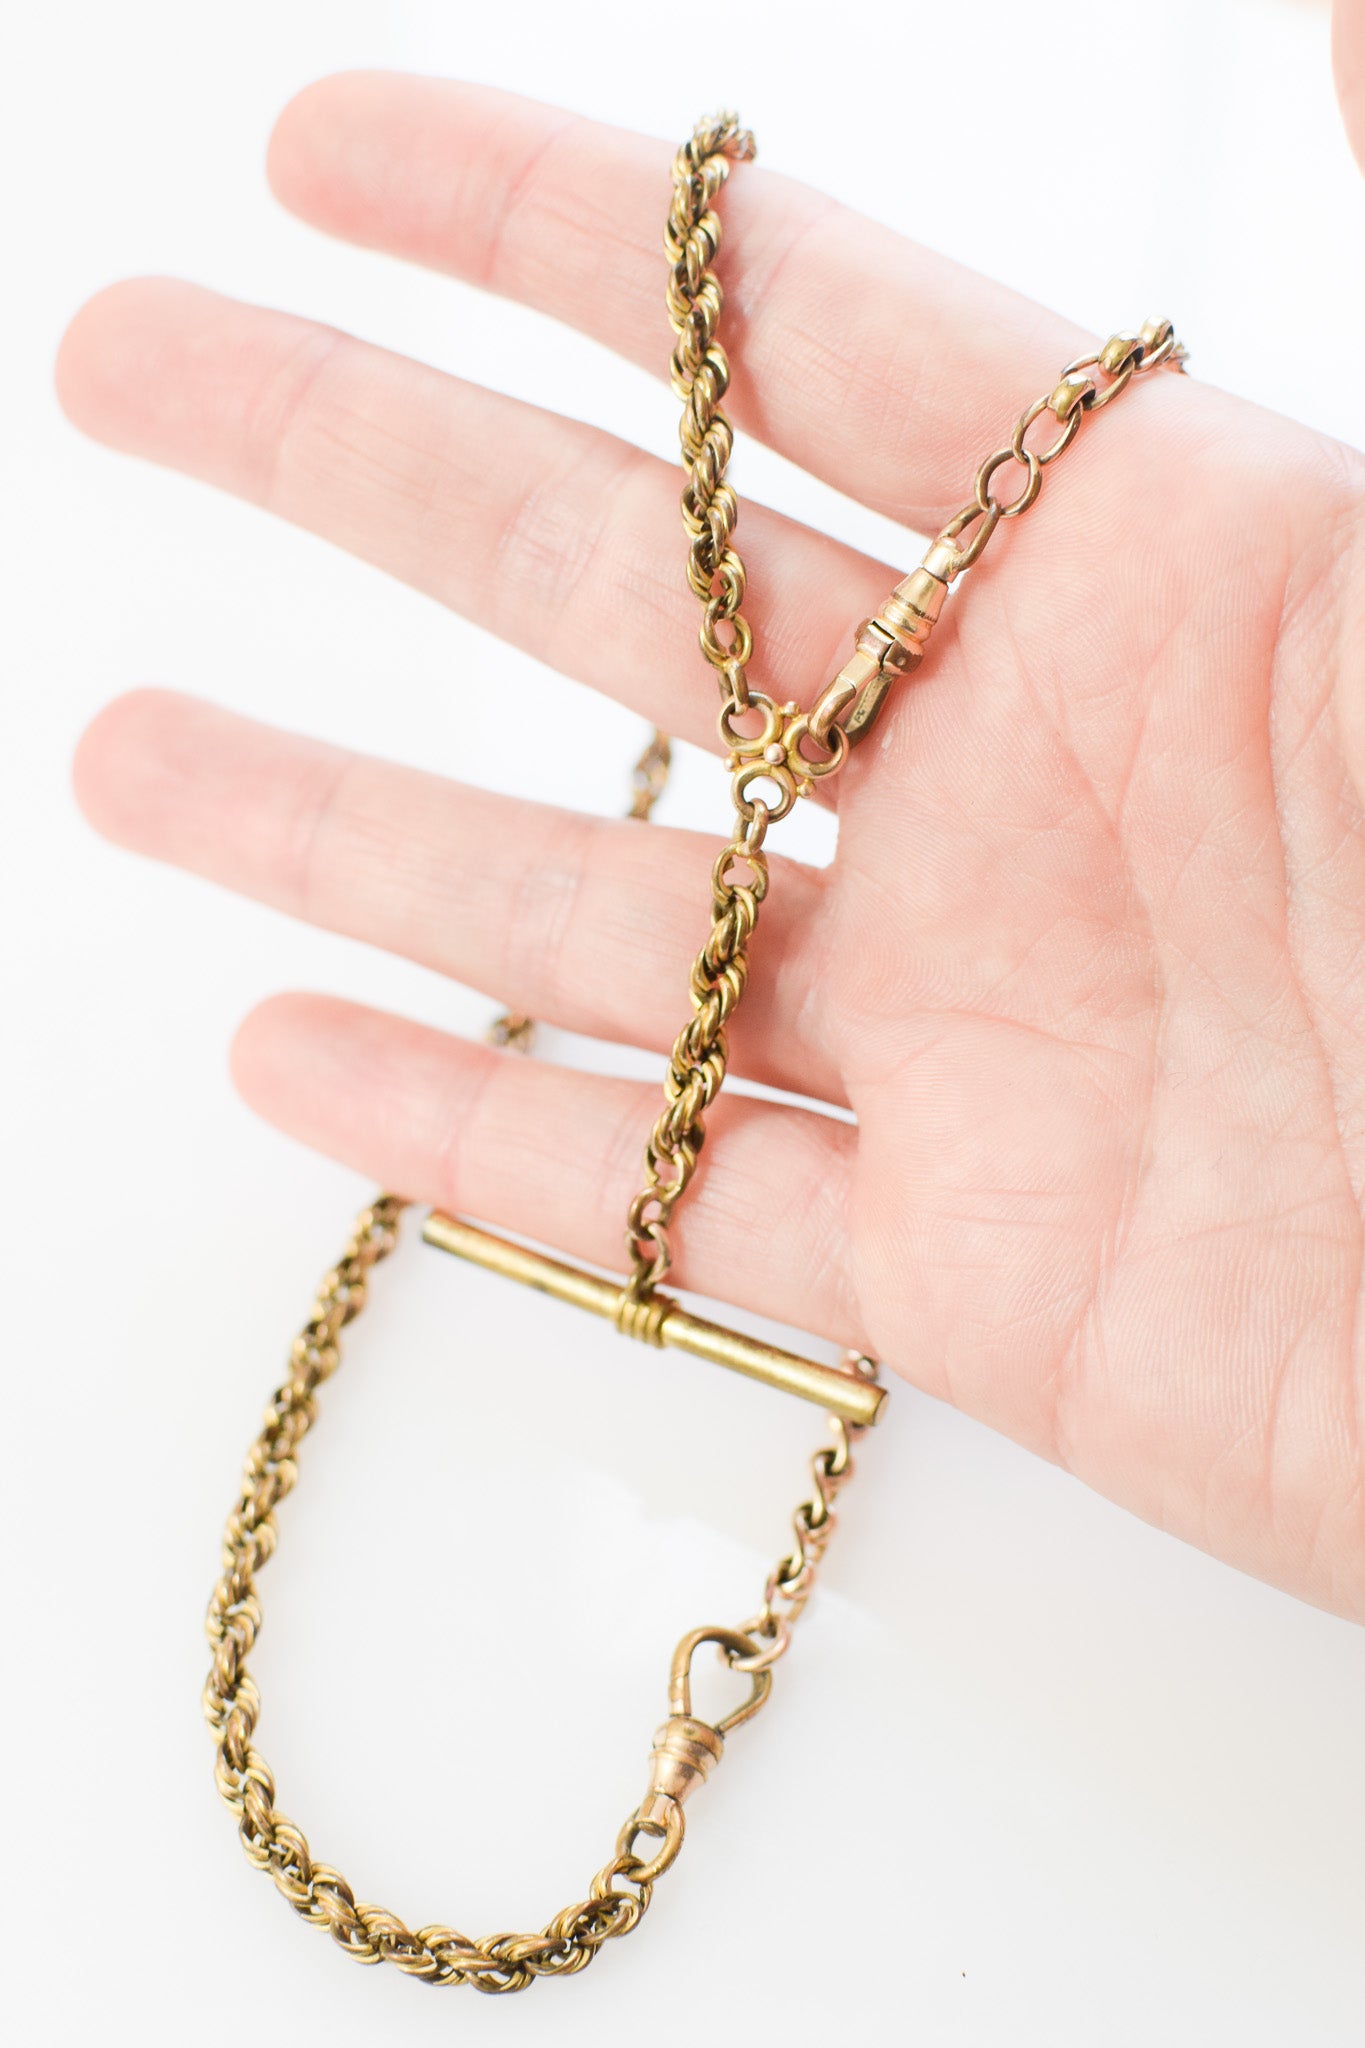 Antique 10kt Gold-filled Fob Chain Necklace with T-Bar | 19"